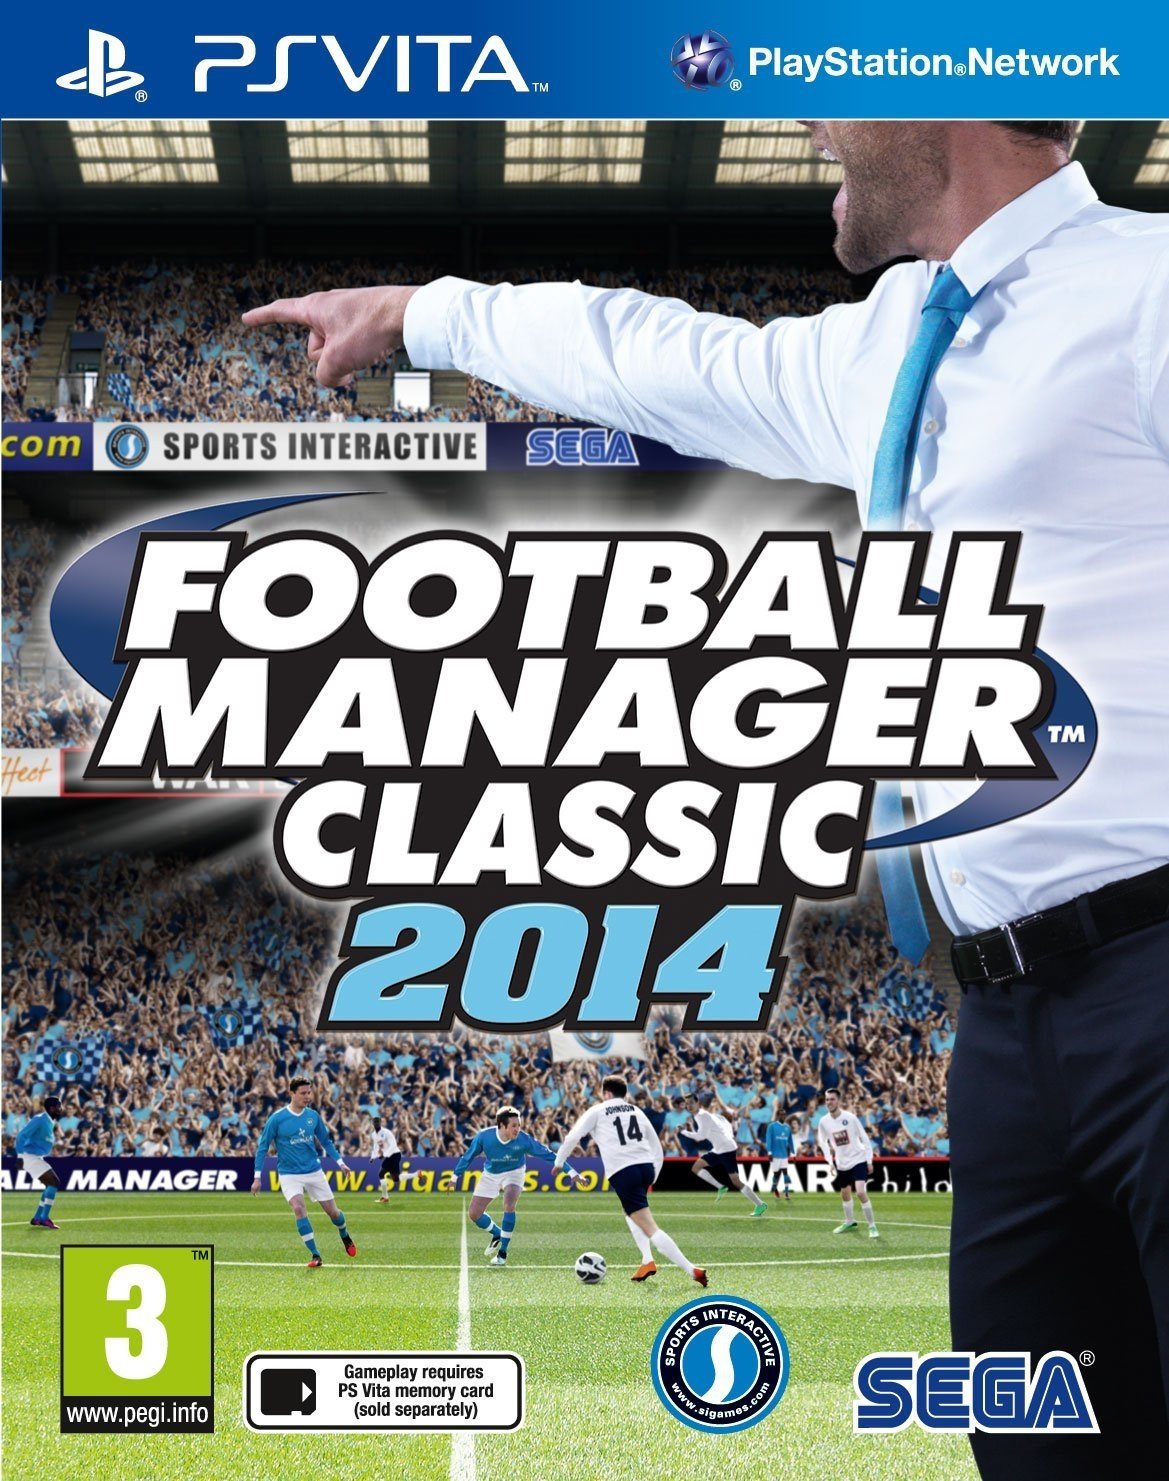 Image of Football Manager Classic 2014